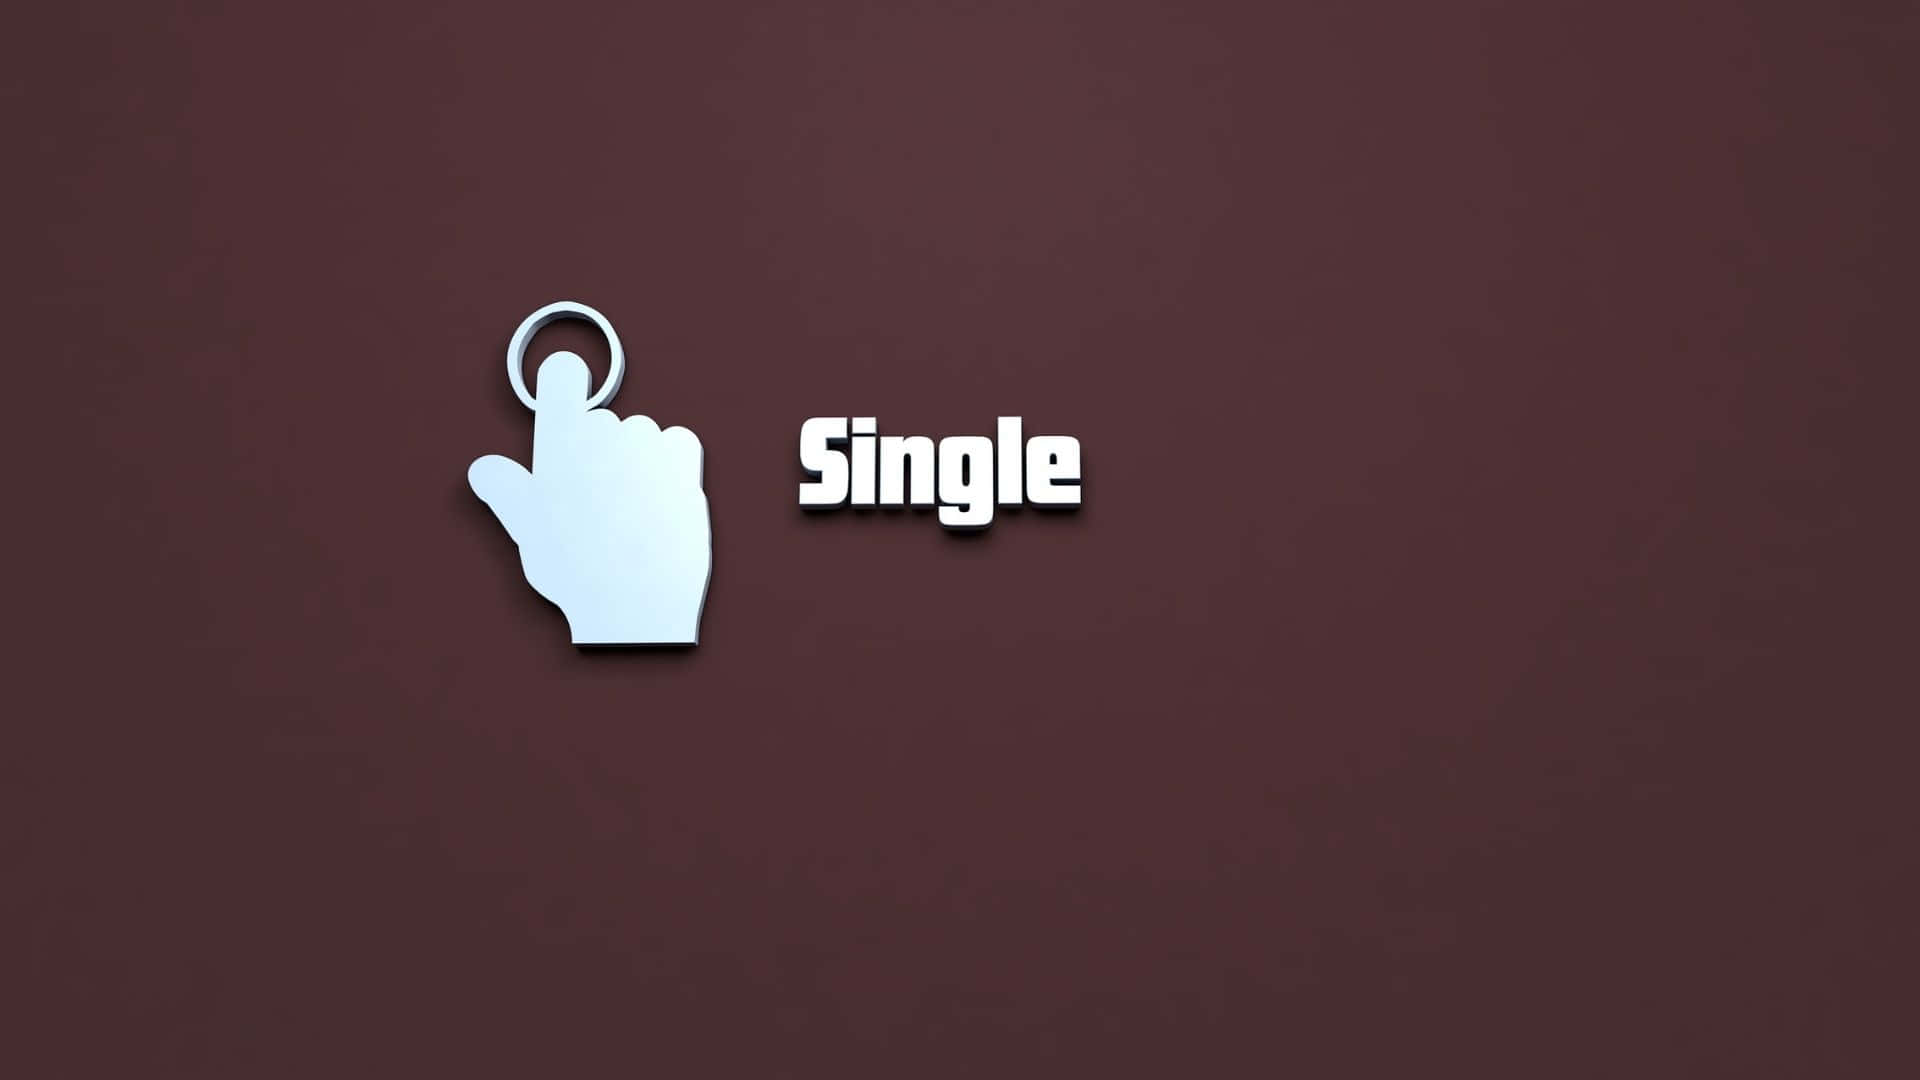 Single Logo On A Brown Background